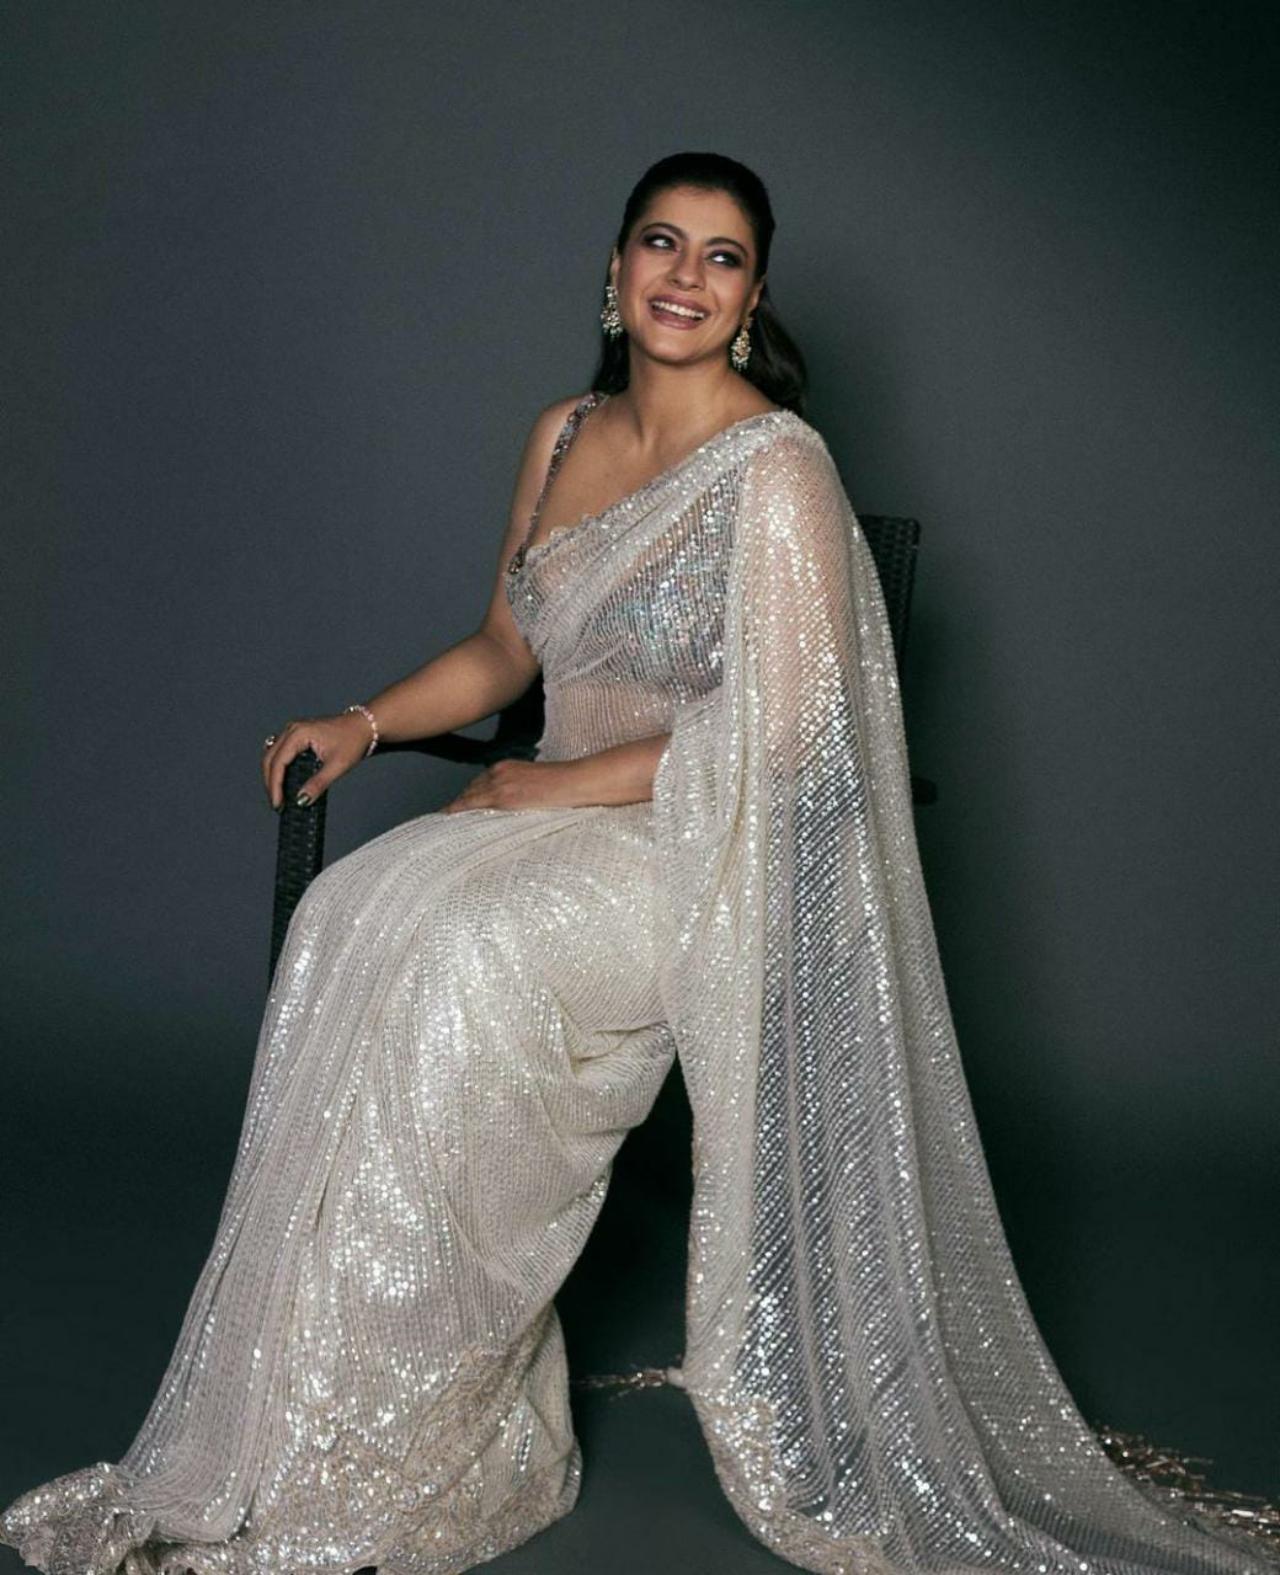 KajolKajol looked truly stunning as she wore a white saree and we can't help but fall for her stunning saree look